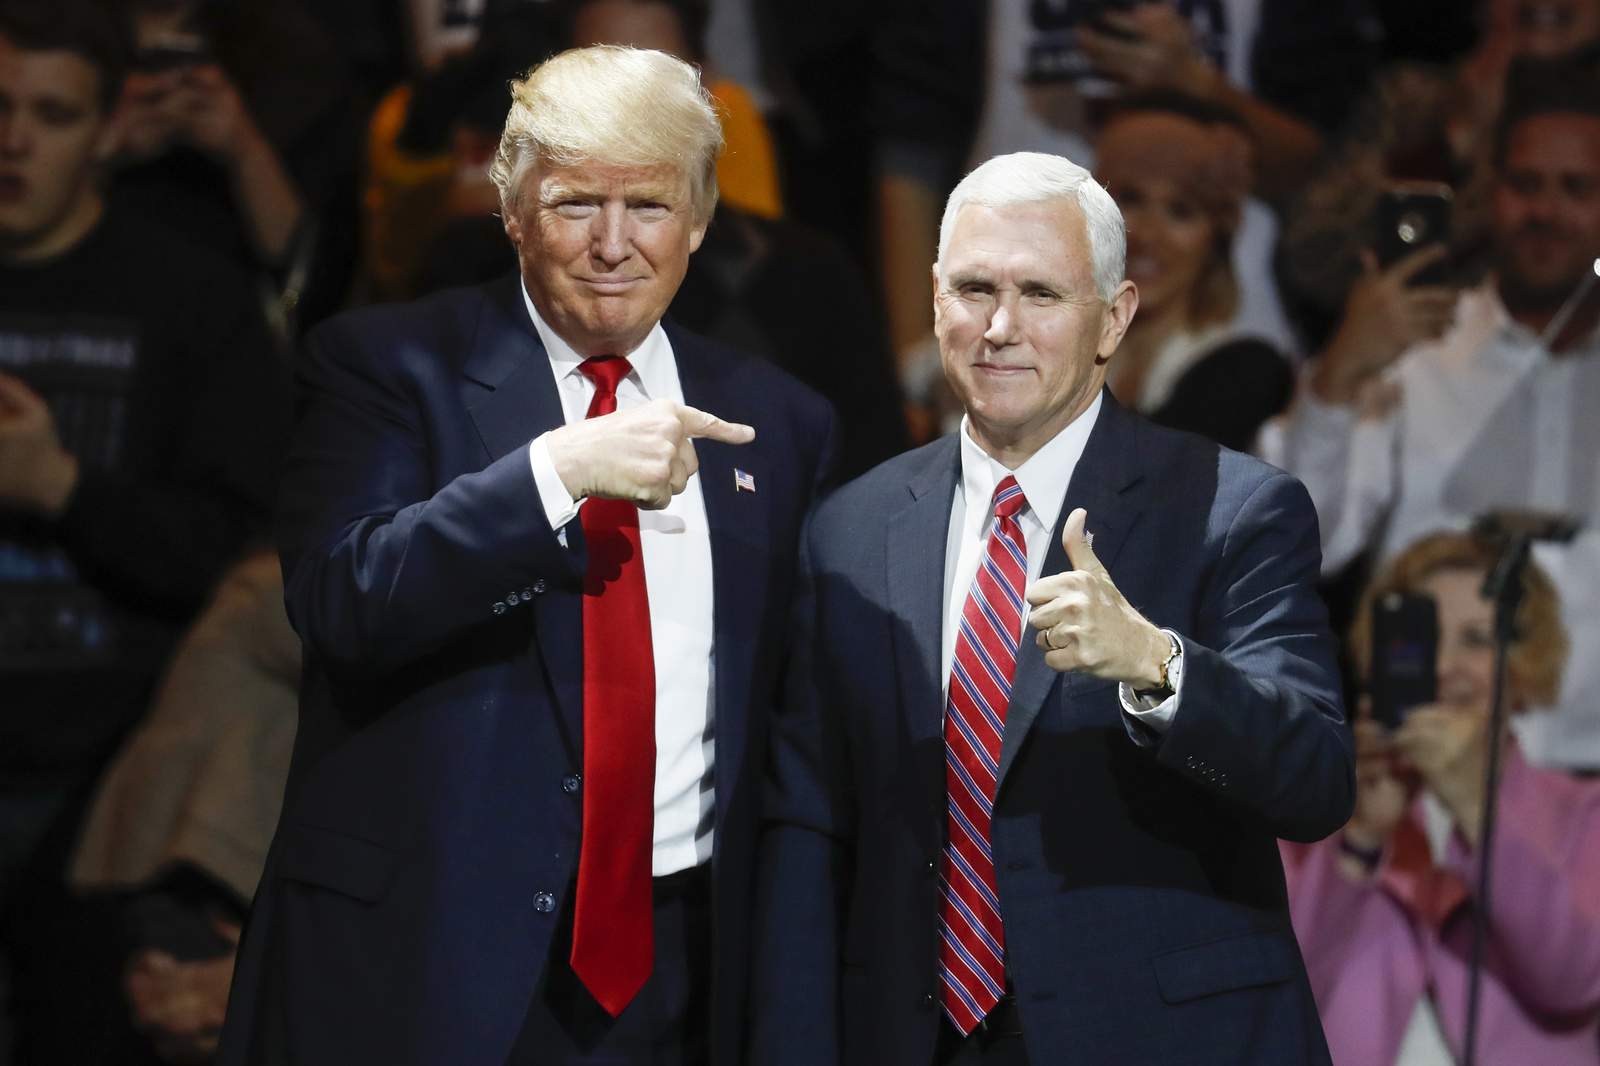 Michigan lawmakers call on Pence to invoke 25th Amendment to remove Trump from office